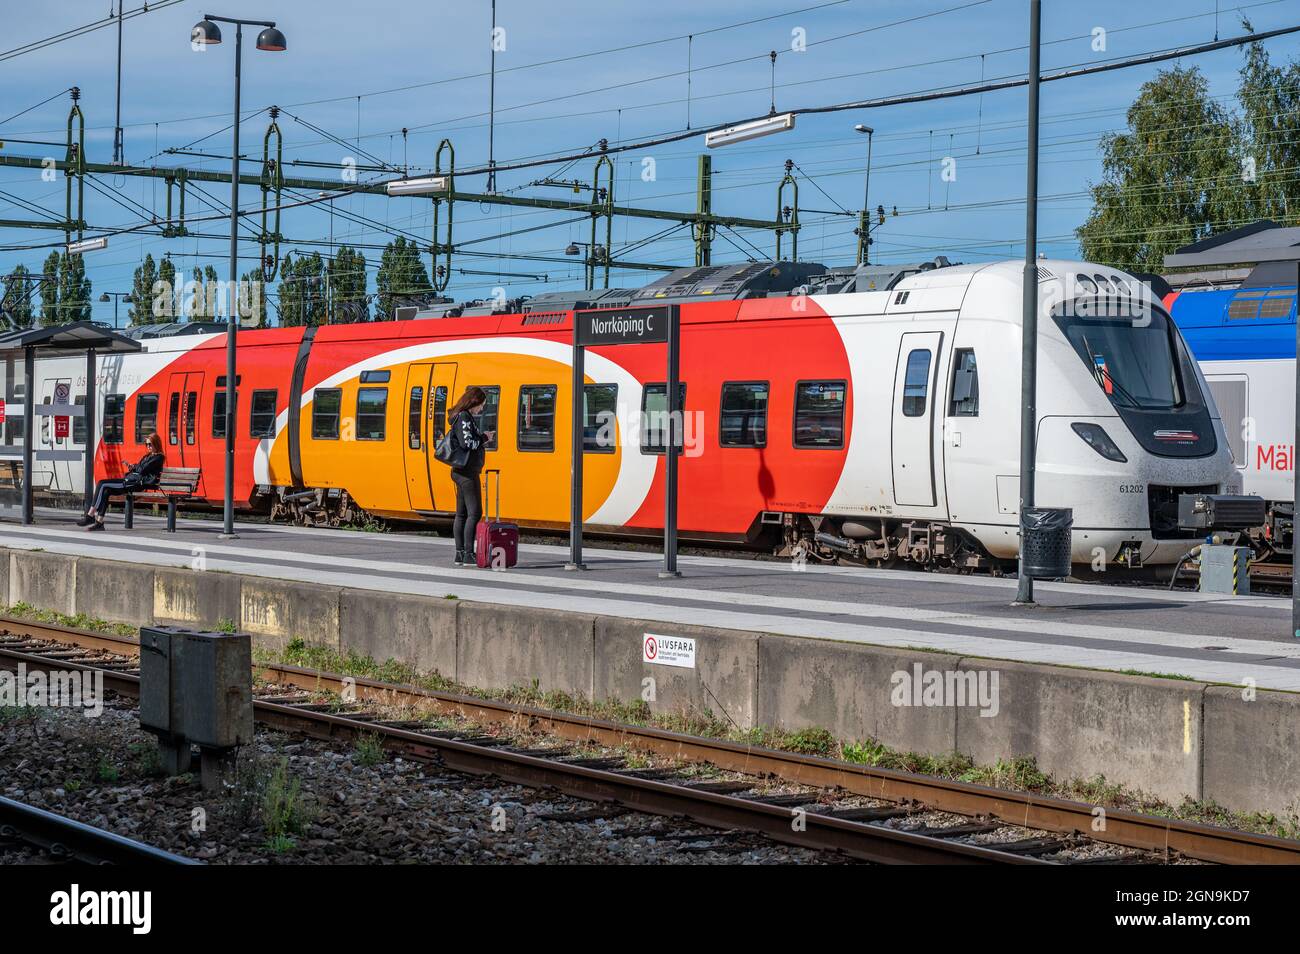 Commuter train between Norrkoping and Linkoping at Norrkoping Central Station in Sweden. Stock Photo